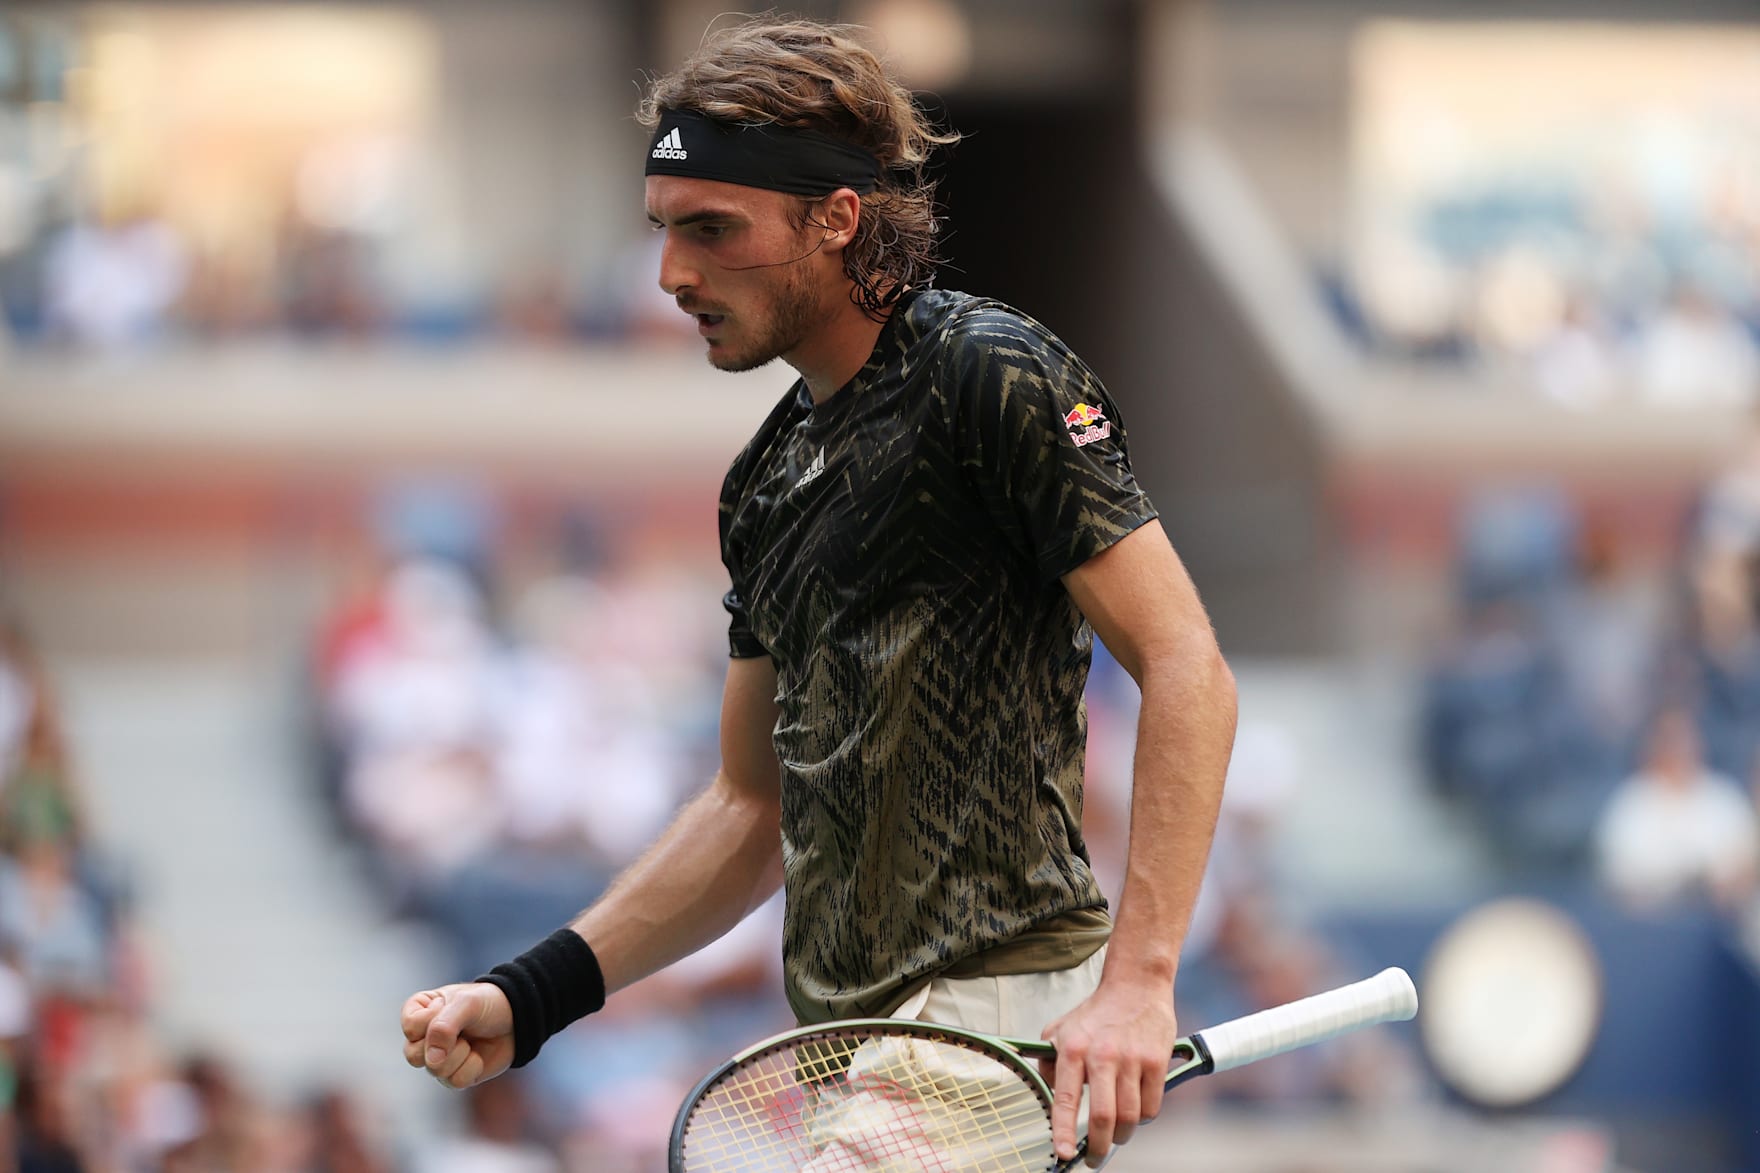 Stefanos Tsitsipas reacts against Andy Murray during their men's singles first round match at the 2021 US Open at the Billie Jean King National Tennis Center on August 30, 2021 in New York City.